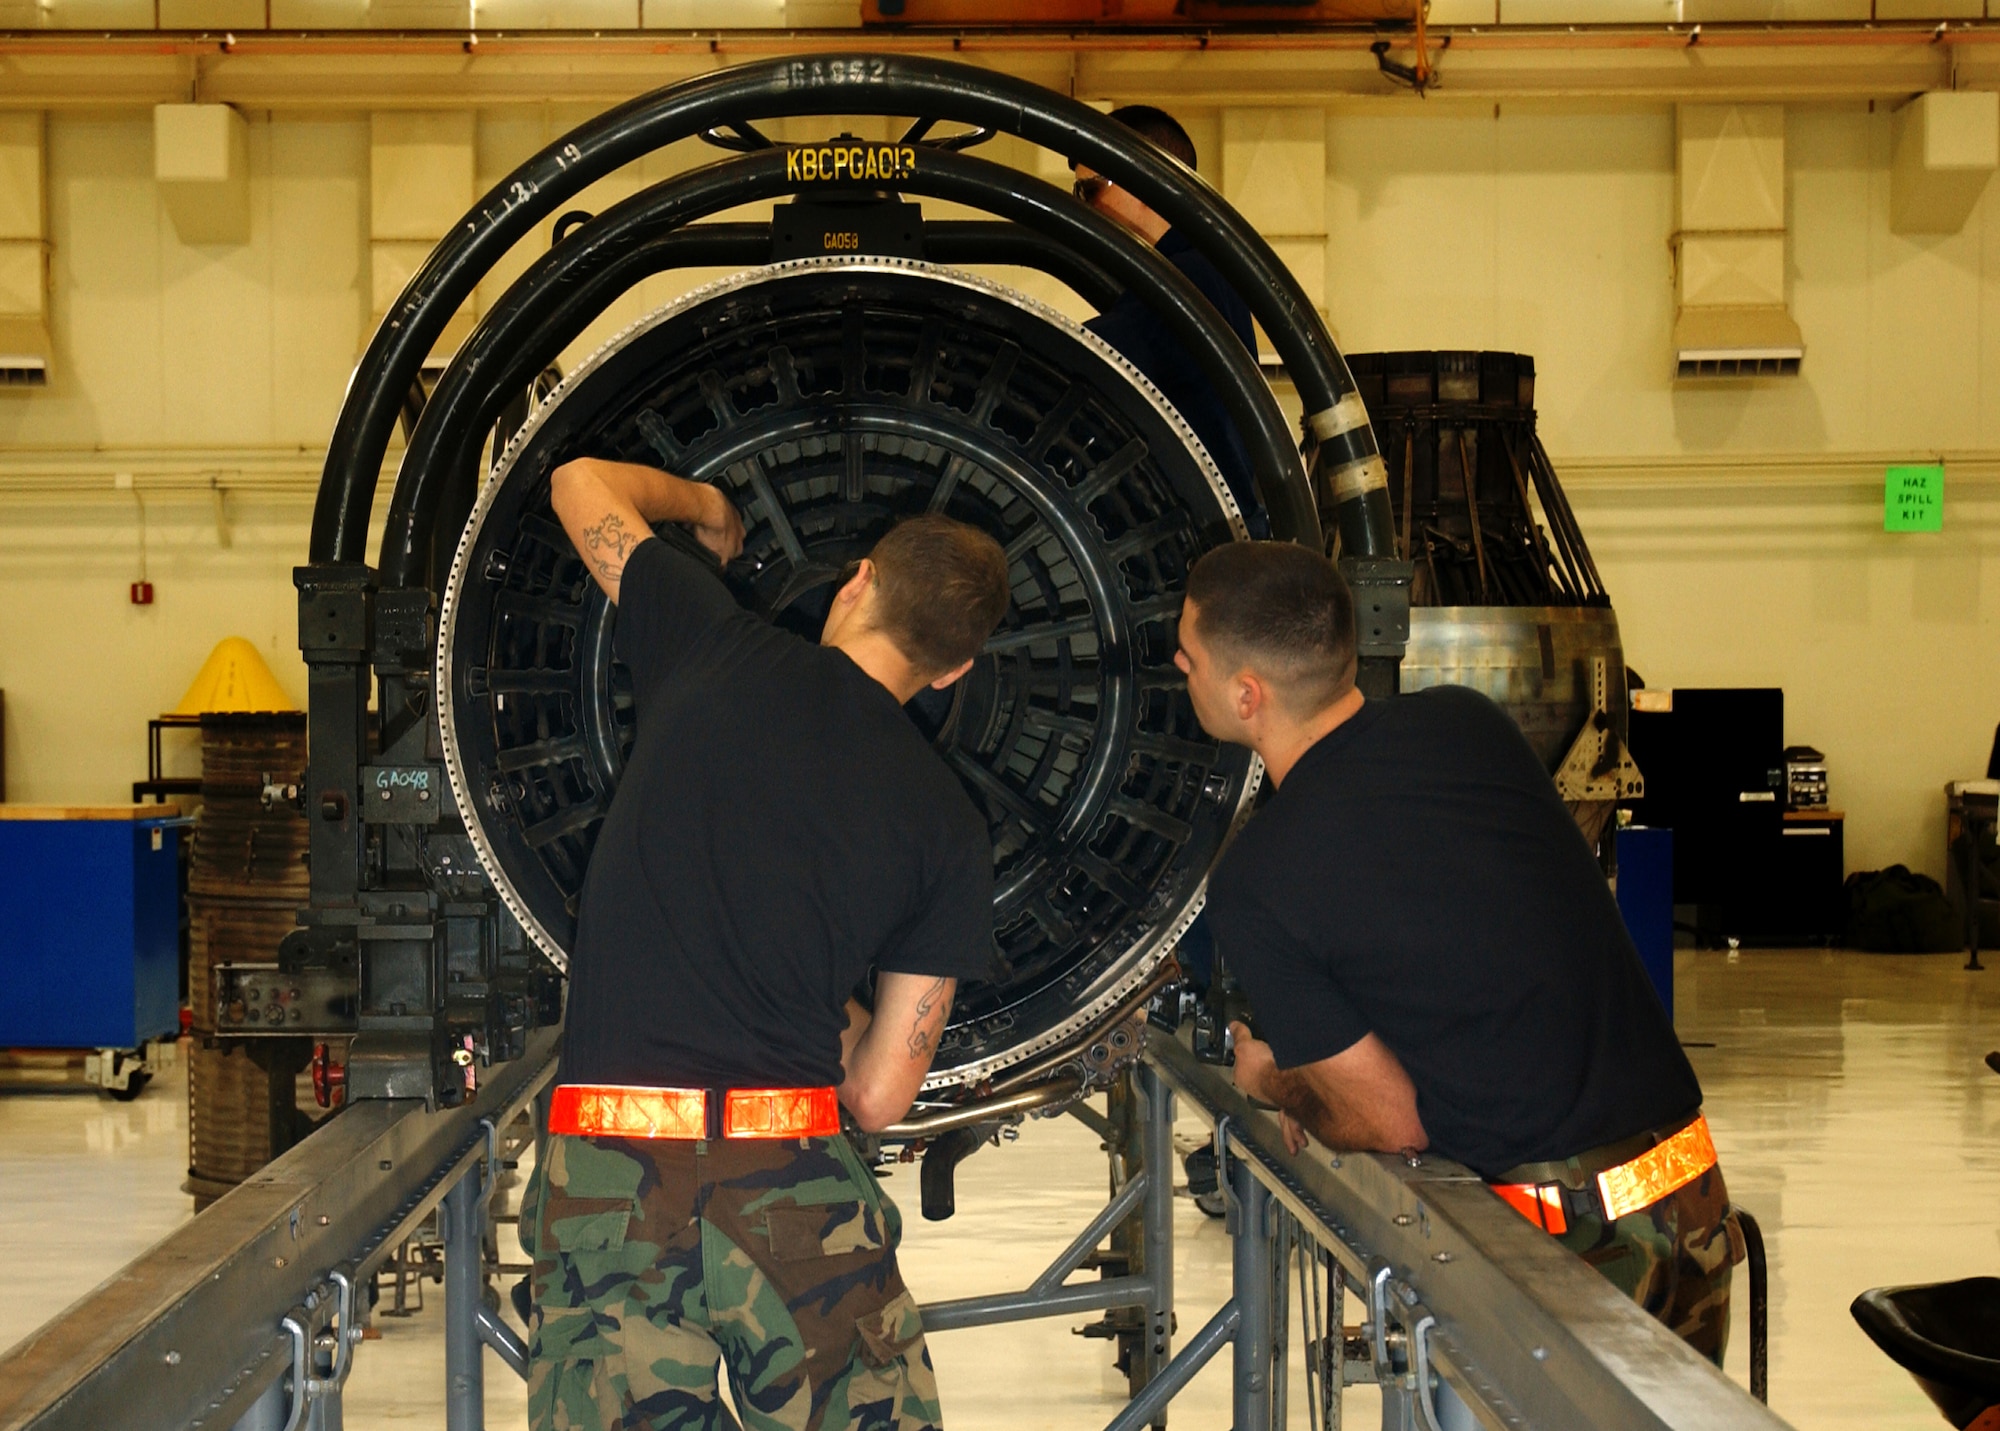 Airman 1st Class Jayson Pearce, 18th Component Maintenance Squadron Propulsion Flight, removes bolts securing the flame holder in place for a F-15 engine as his supervisor looks on during the 2008 Pacific Air Forces Operational Readiness Inspection at Kadena Air Base, Japan, March 10, 2008. PACAF is conducting the inspection from March 9 to 15 to validate the mission readiness of the 18th Wing.
(U.S. Air Force photo/Senior Airman Jeremy McGuffin) 